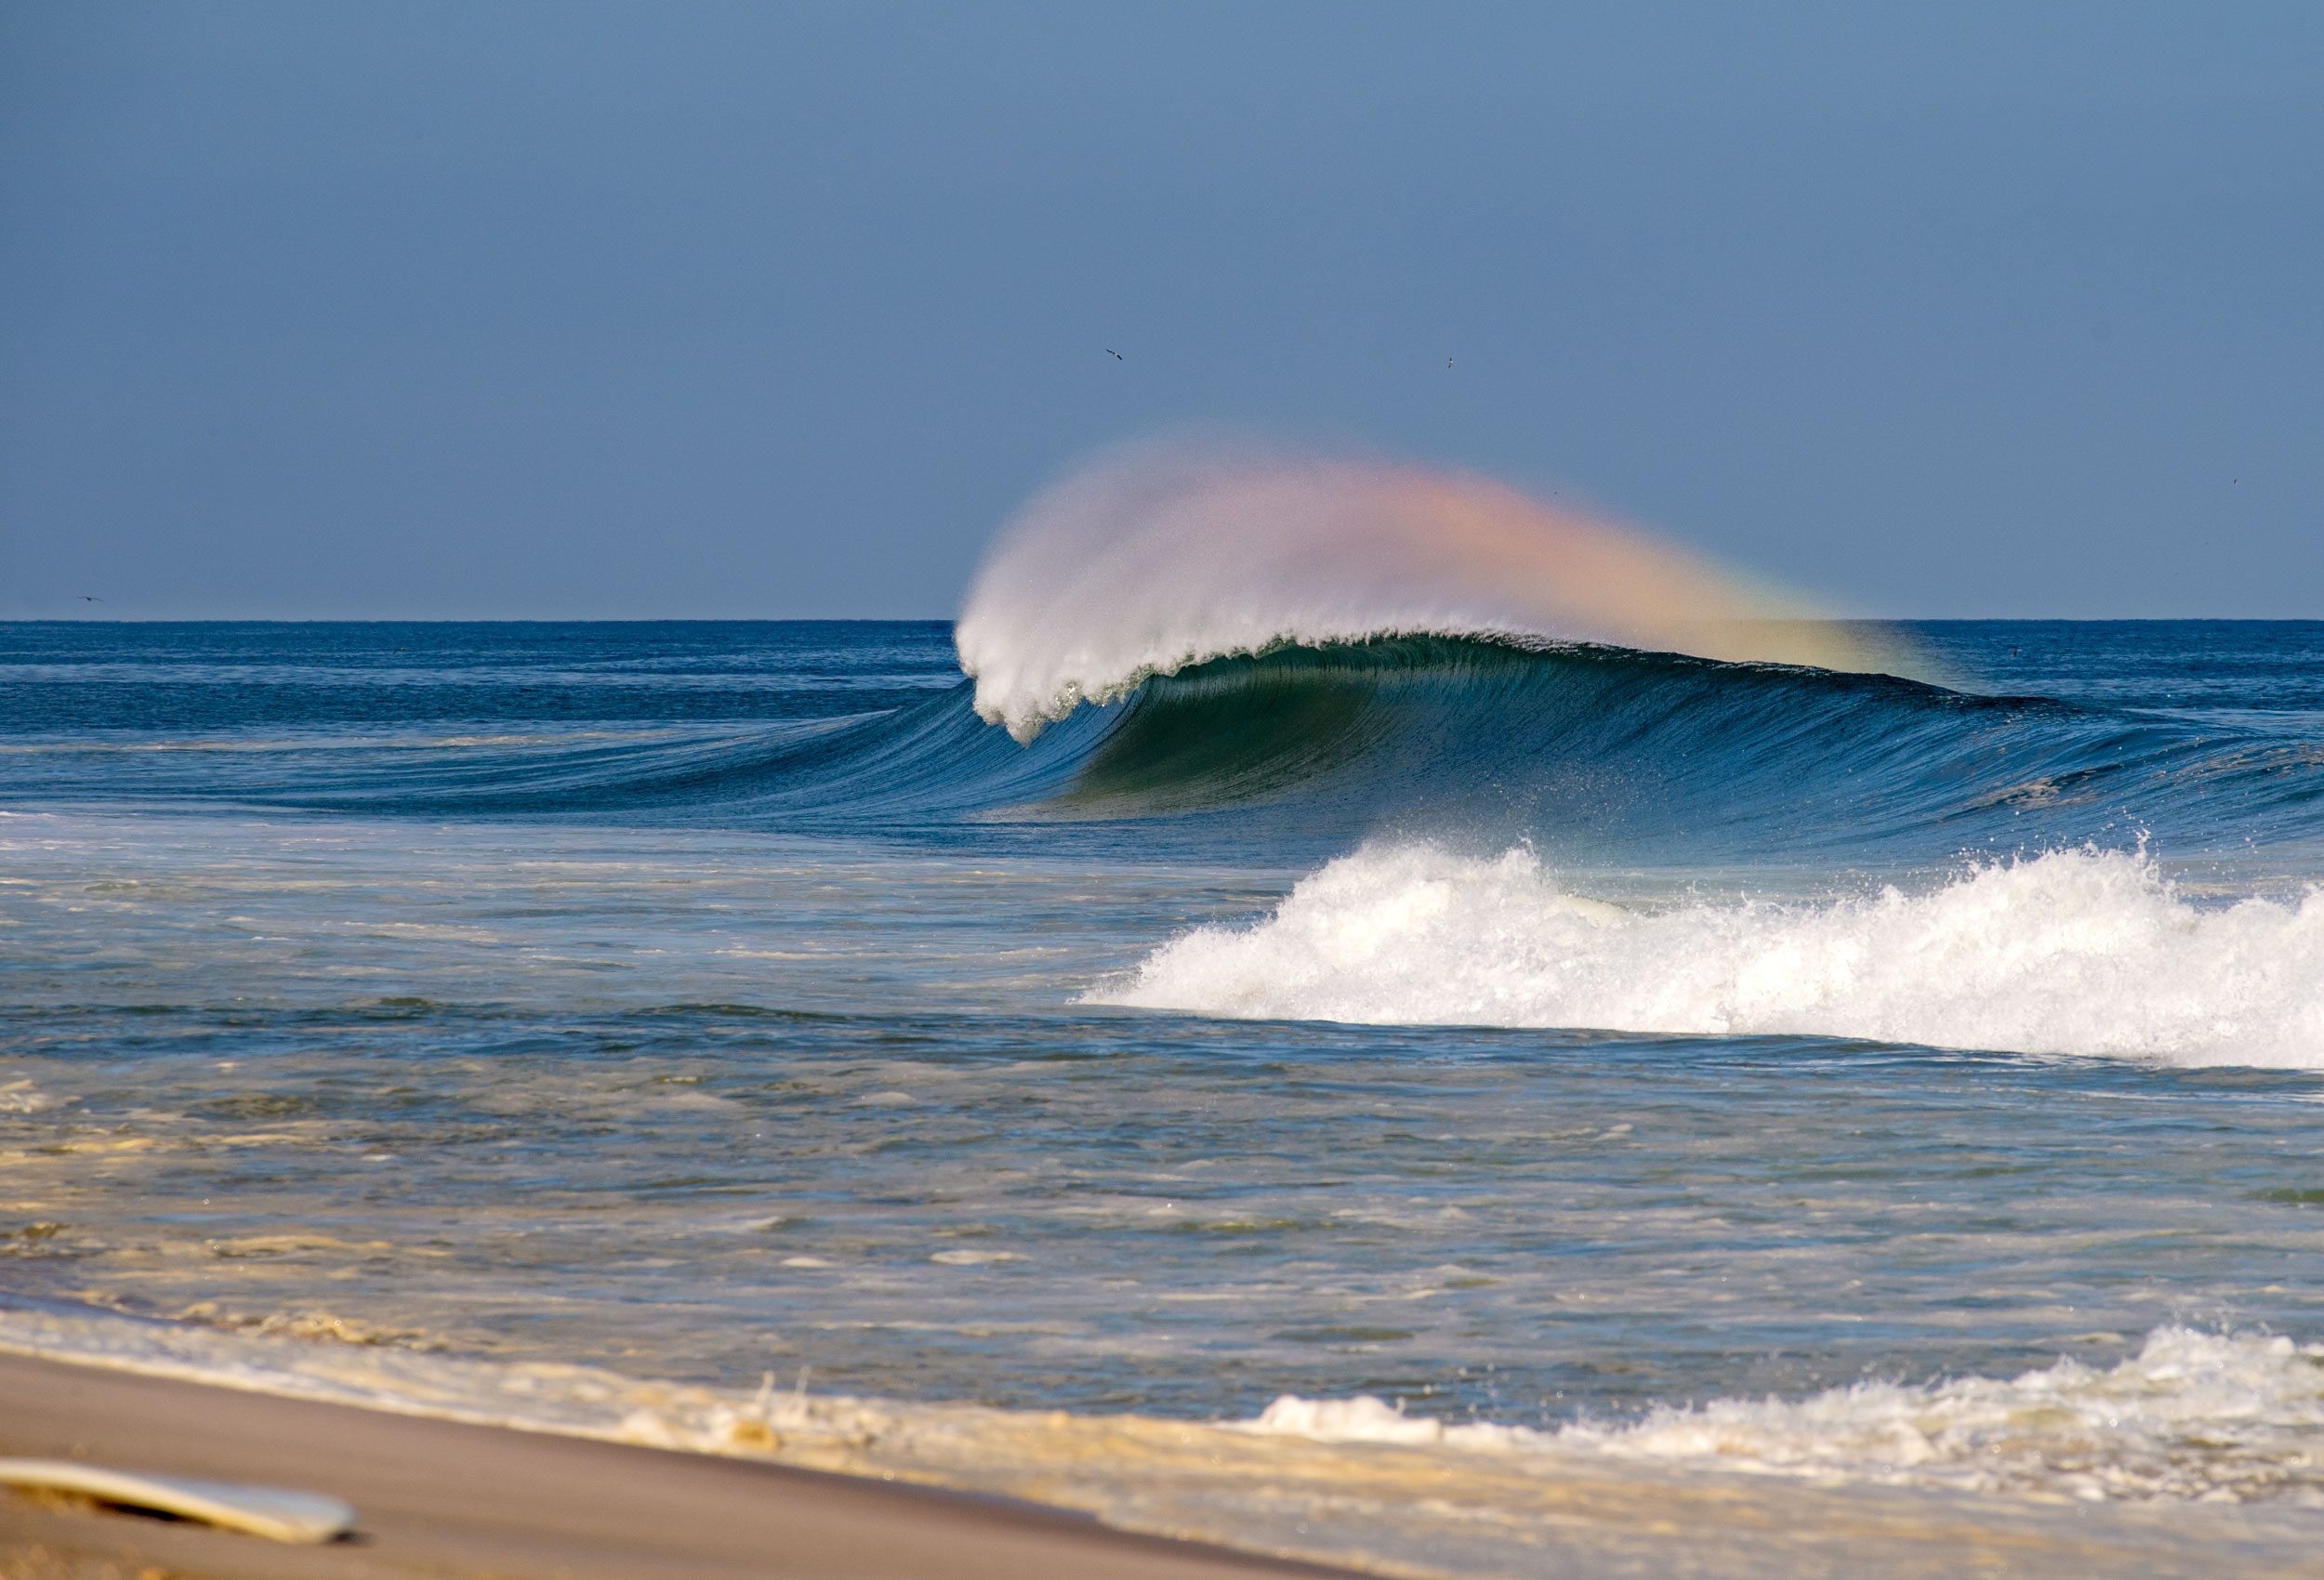 West wind makes a rainbow in the spray on wave in Seaside Heights, NJ.